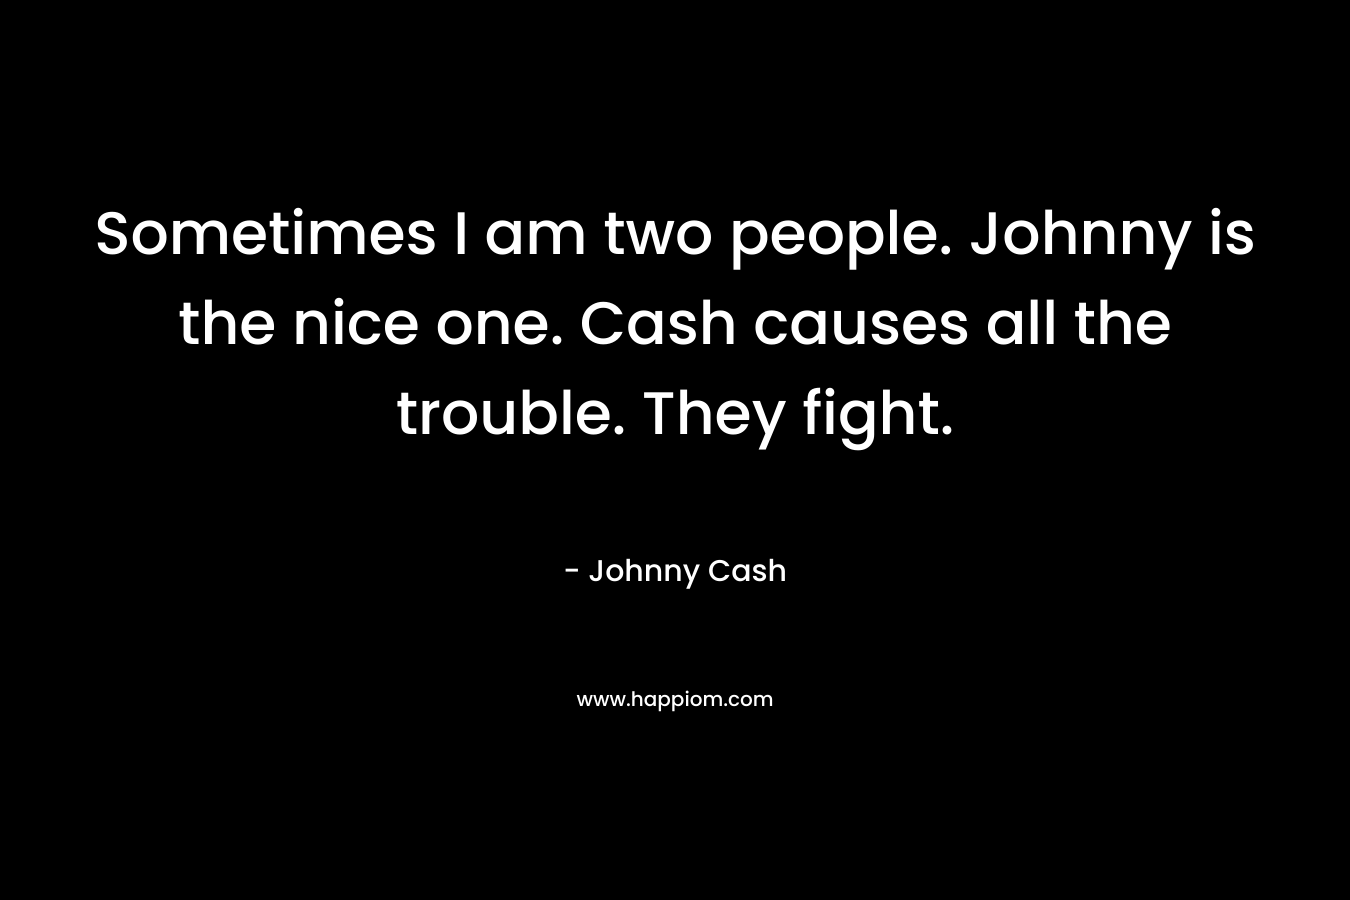 Sometimes I am two people. Johnny is the nice one. Cash causes all the trouble. They fight. – Johnny Cash